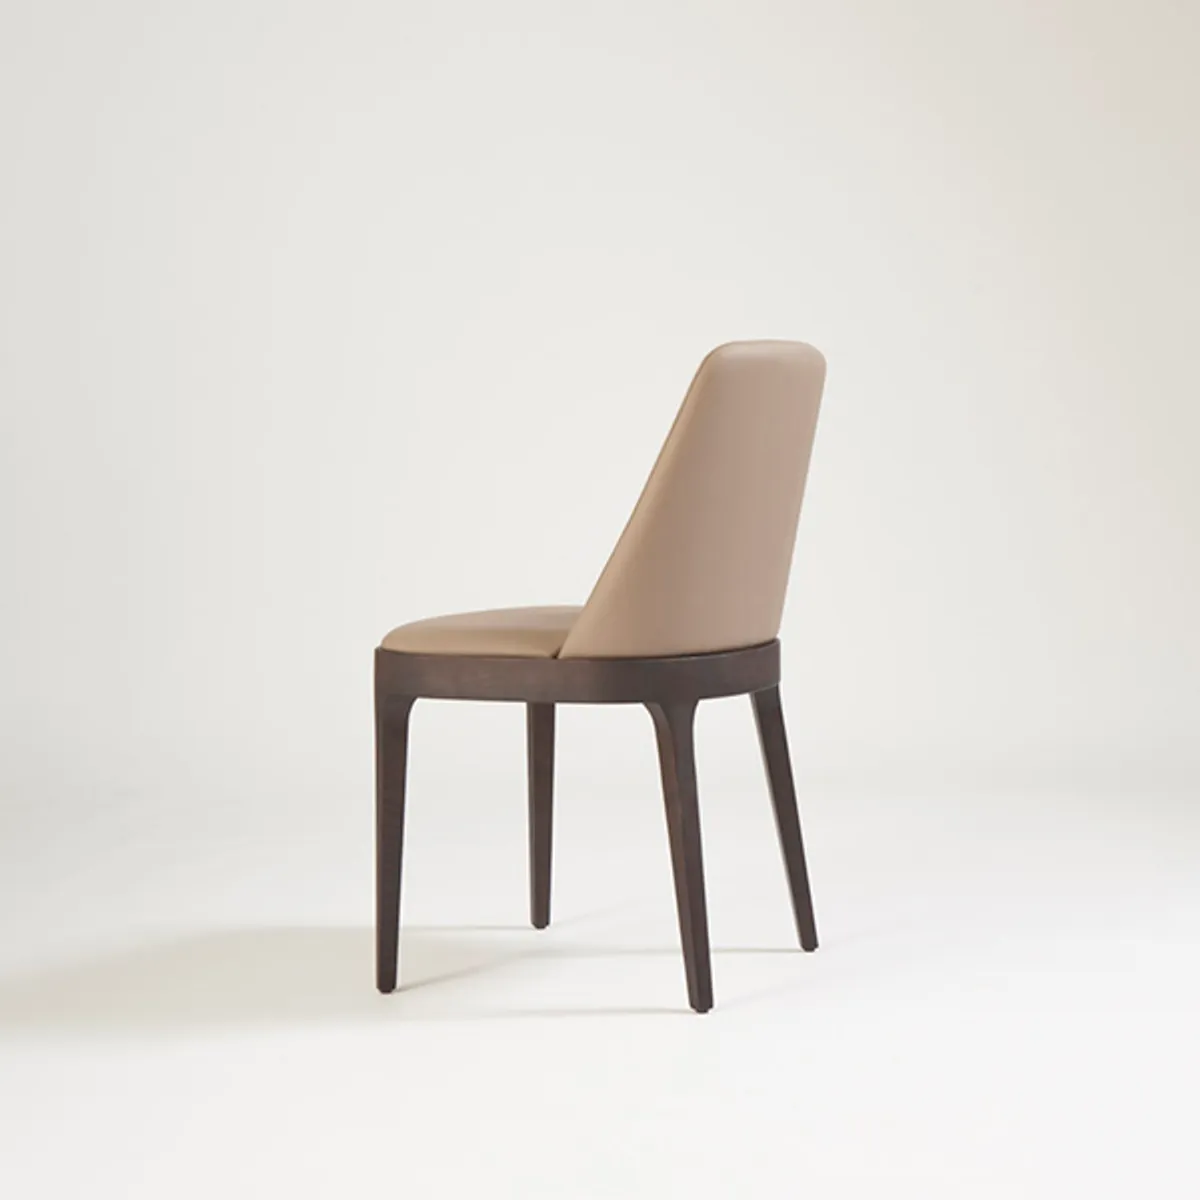 Candor Side Chair 8448 Inside Out Contracts